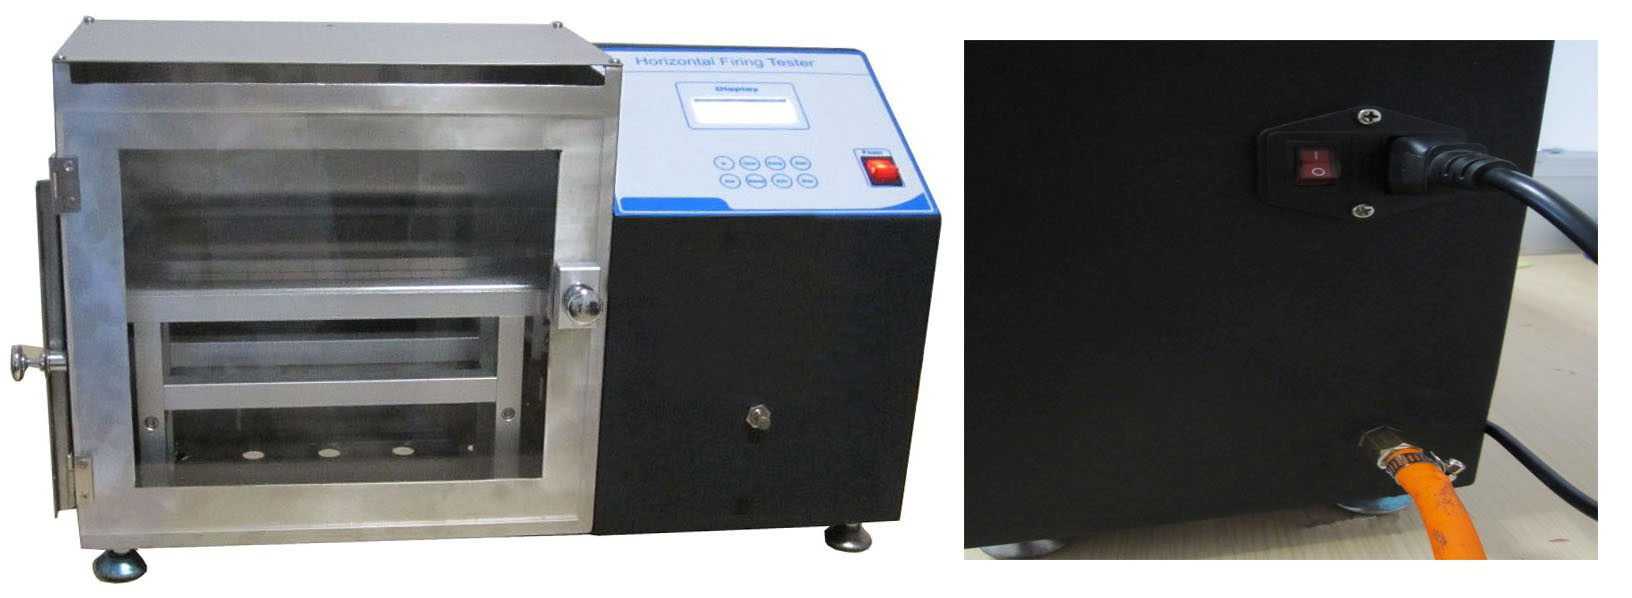 Quality Horizontal Flammability Tester for sale